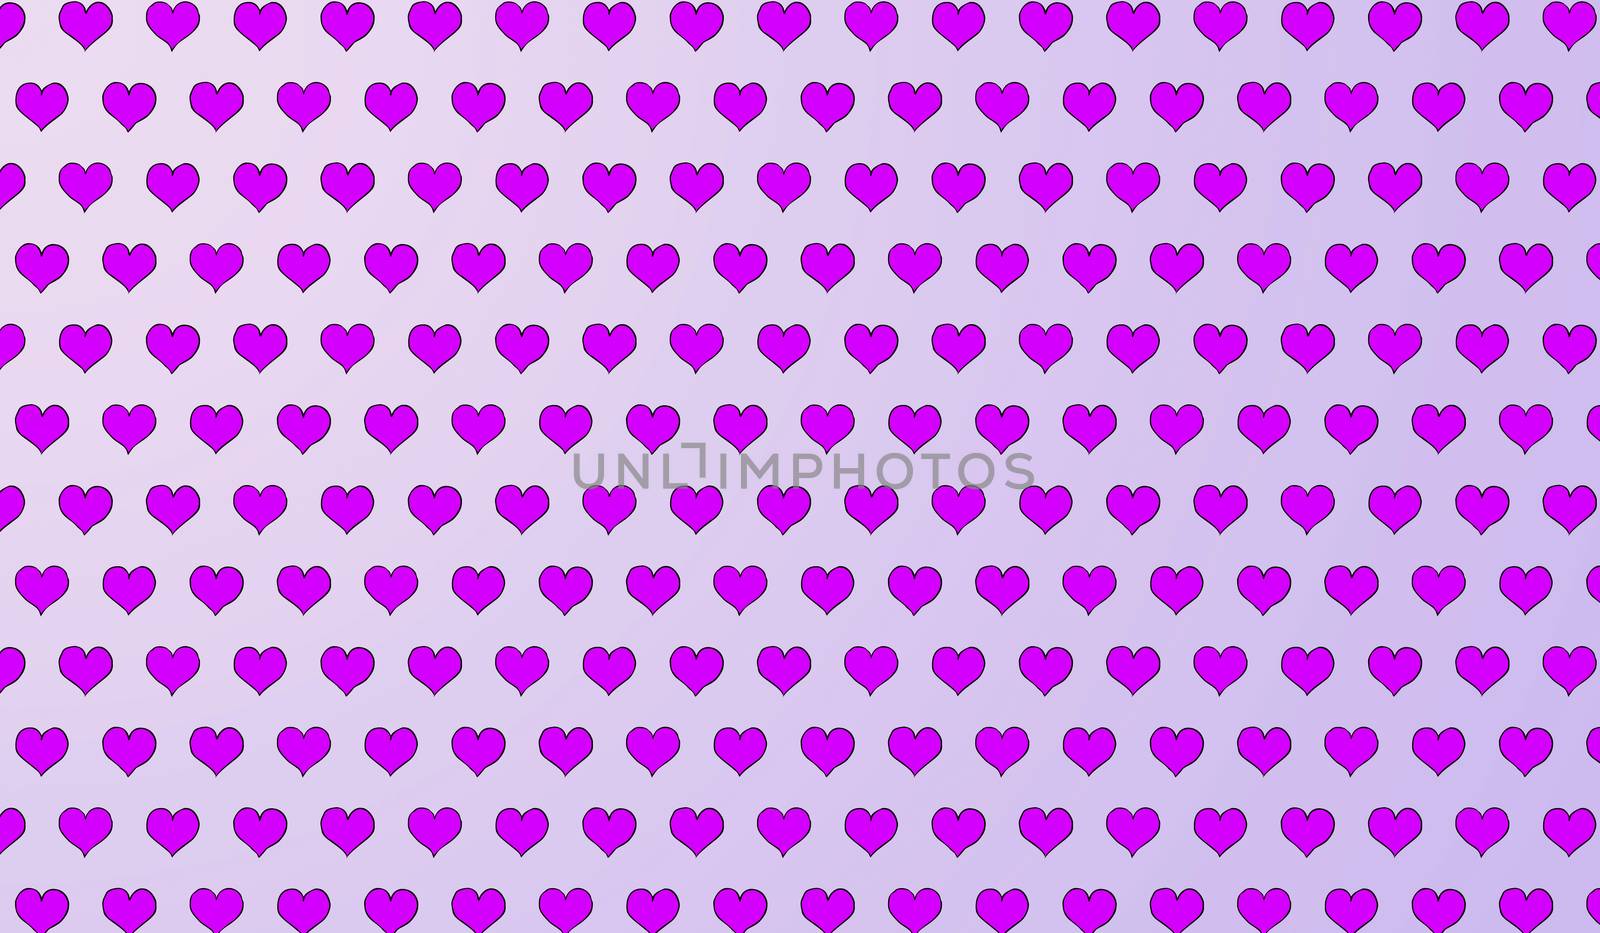 2d violet pattern of cartoon hearts on isolated background by Andreajk3